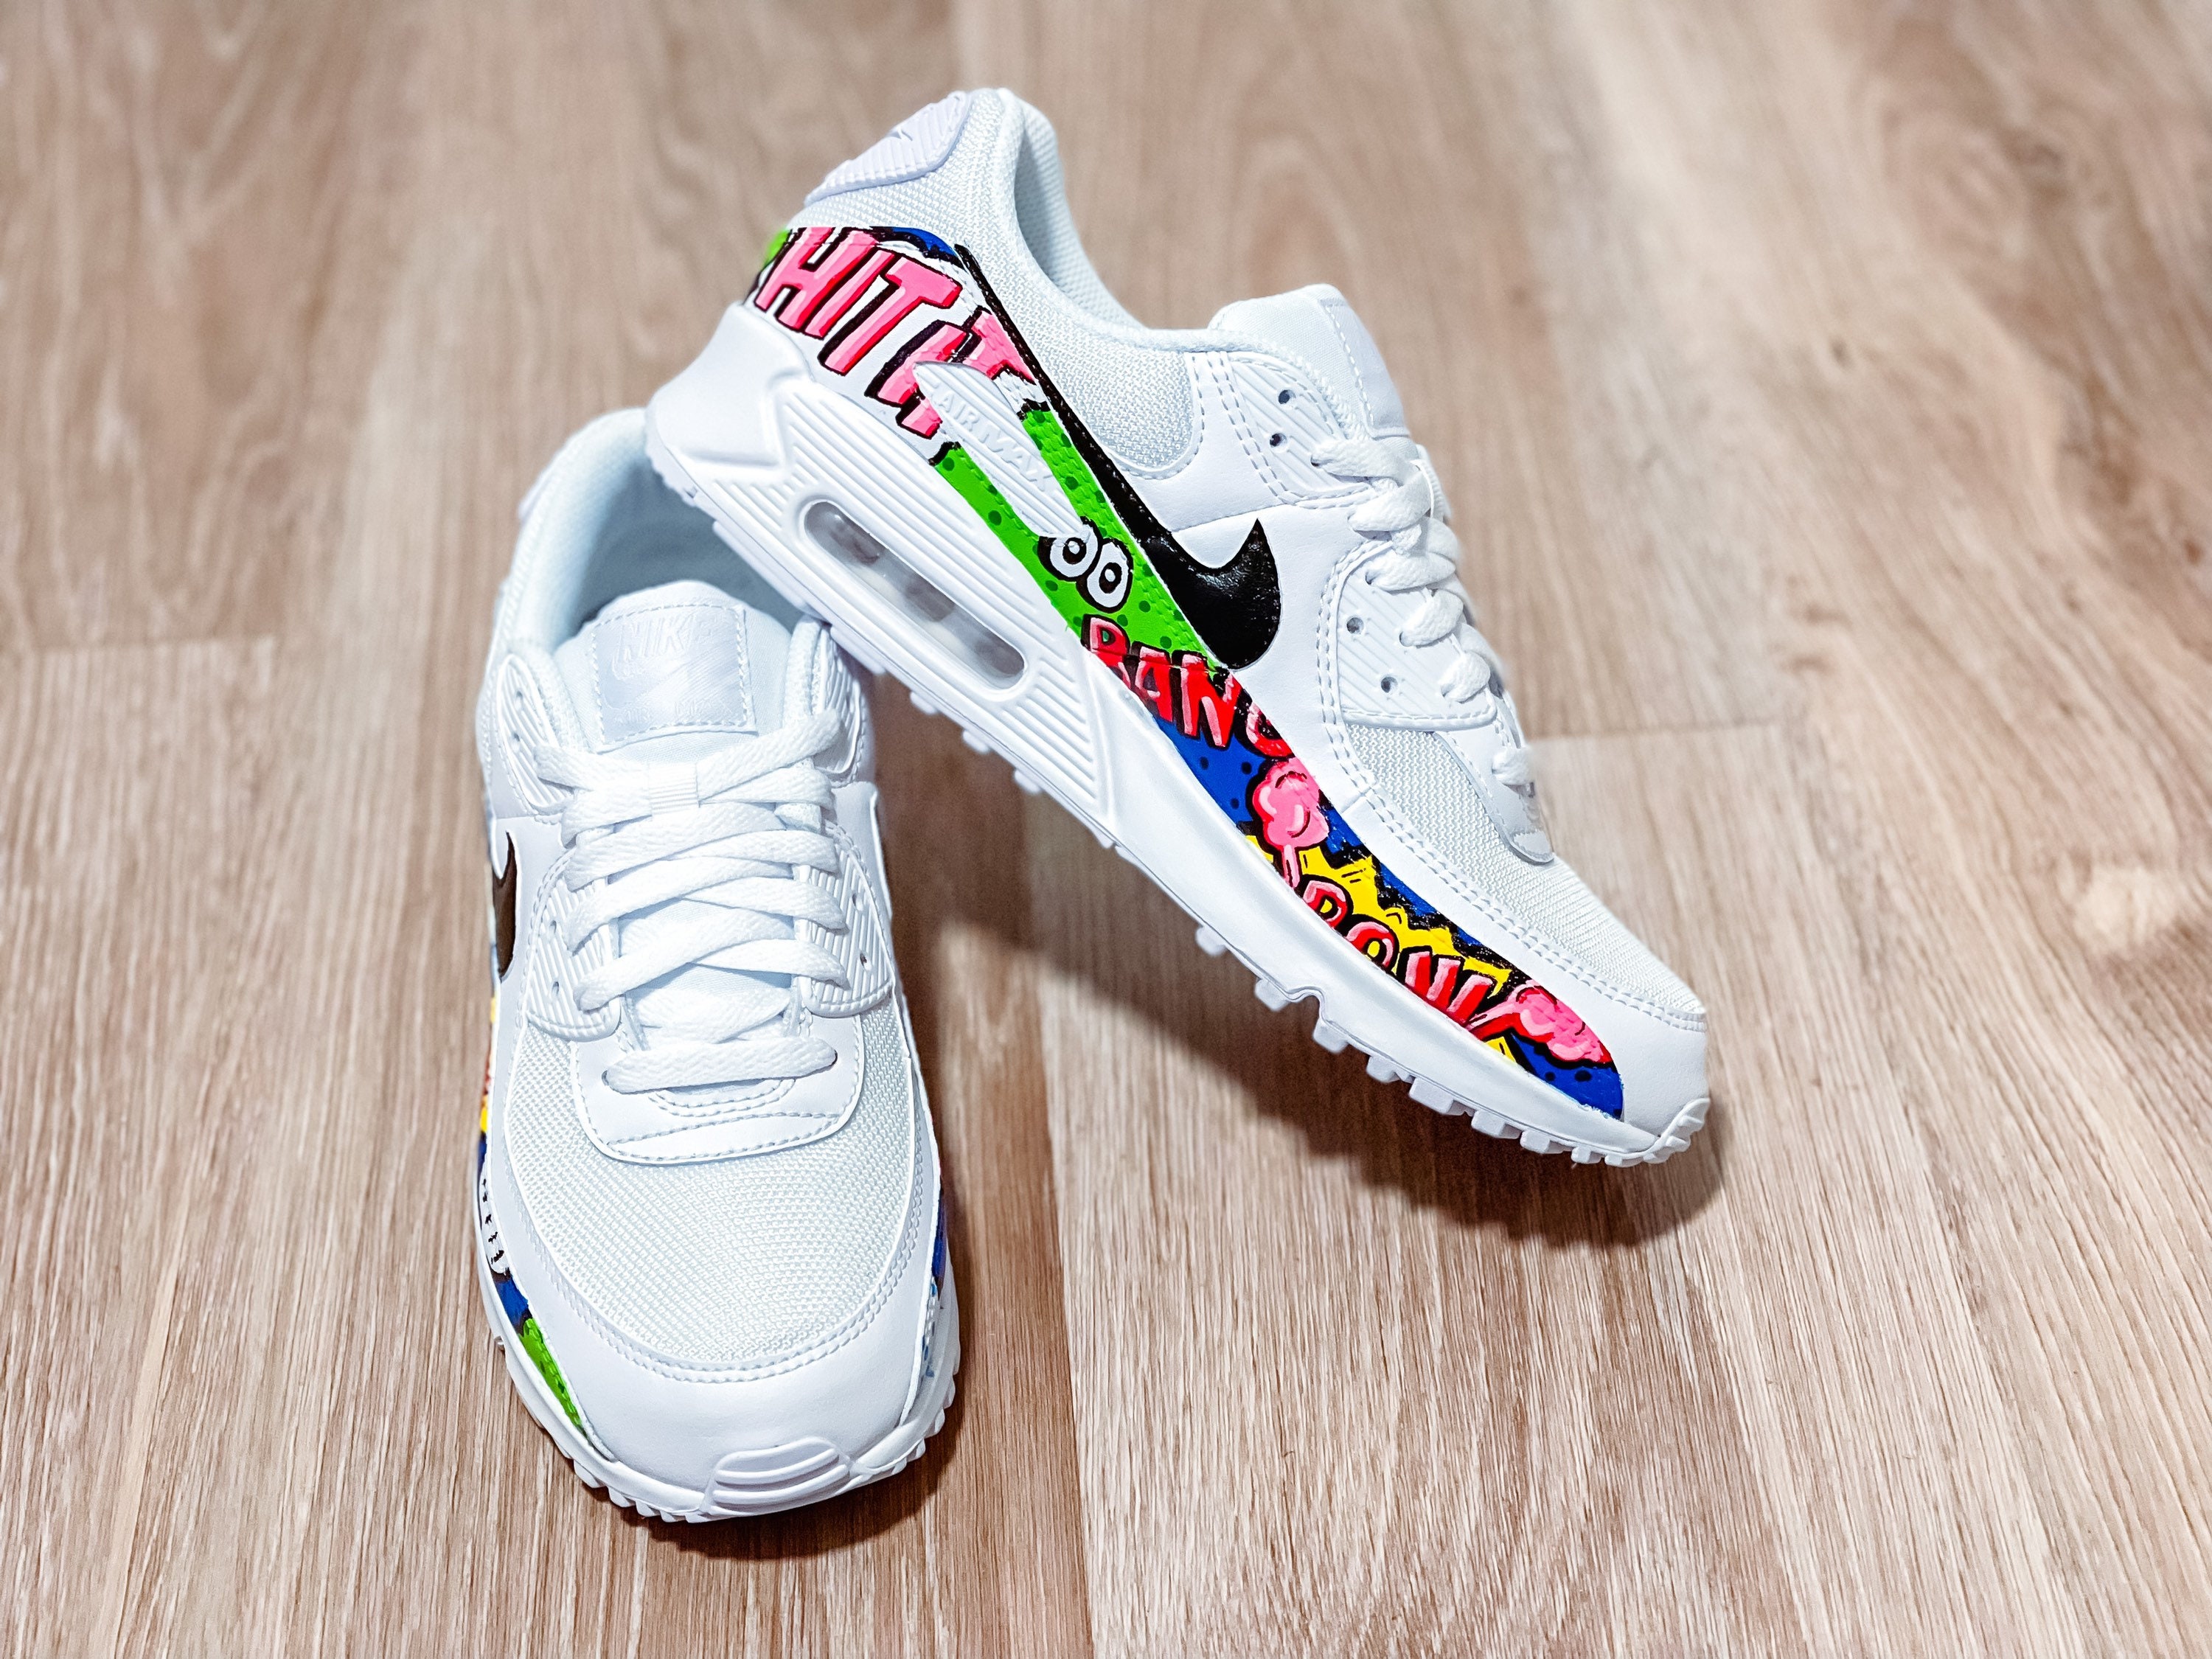 Customizing The SMALLEST Air Max 90's! 🎨👟 